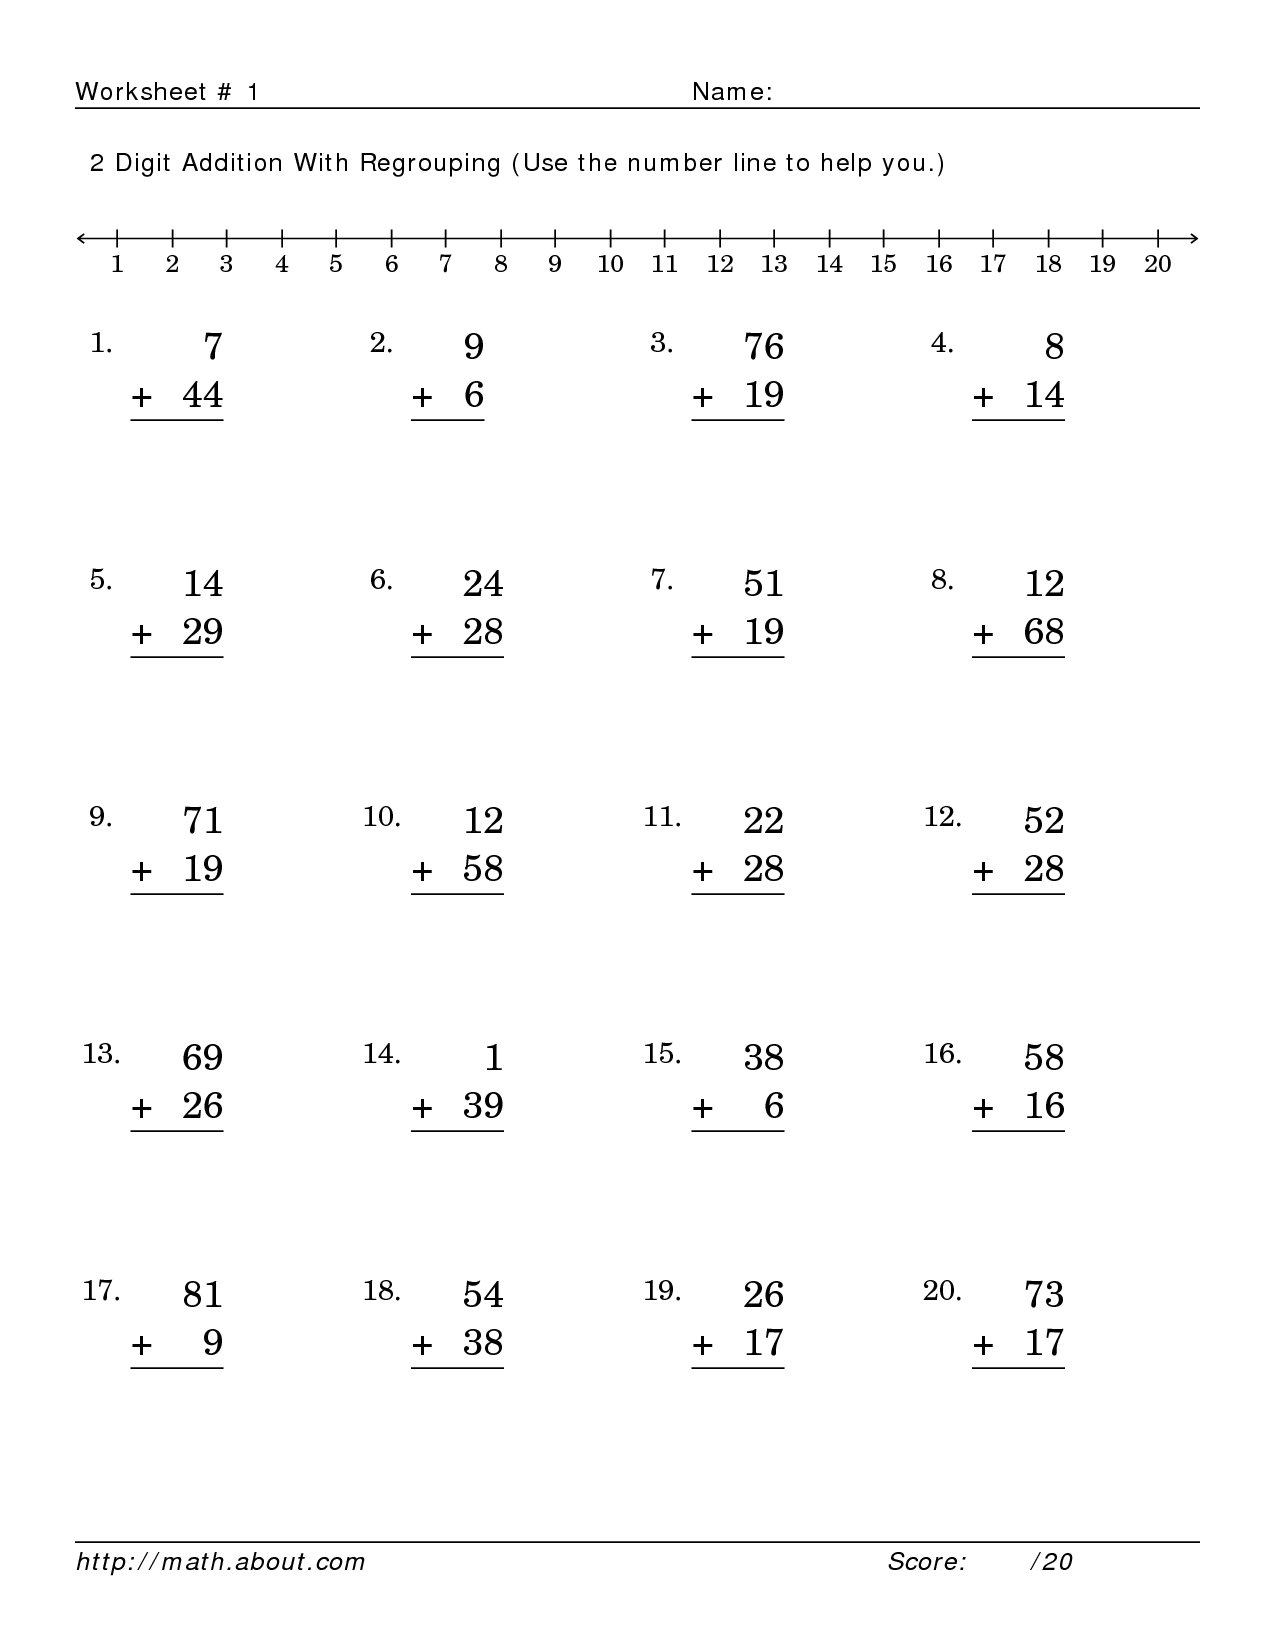 Addition With Regrouping Practice